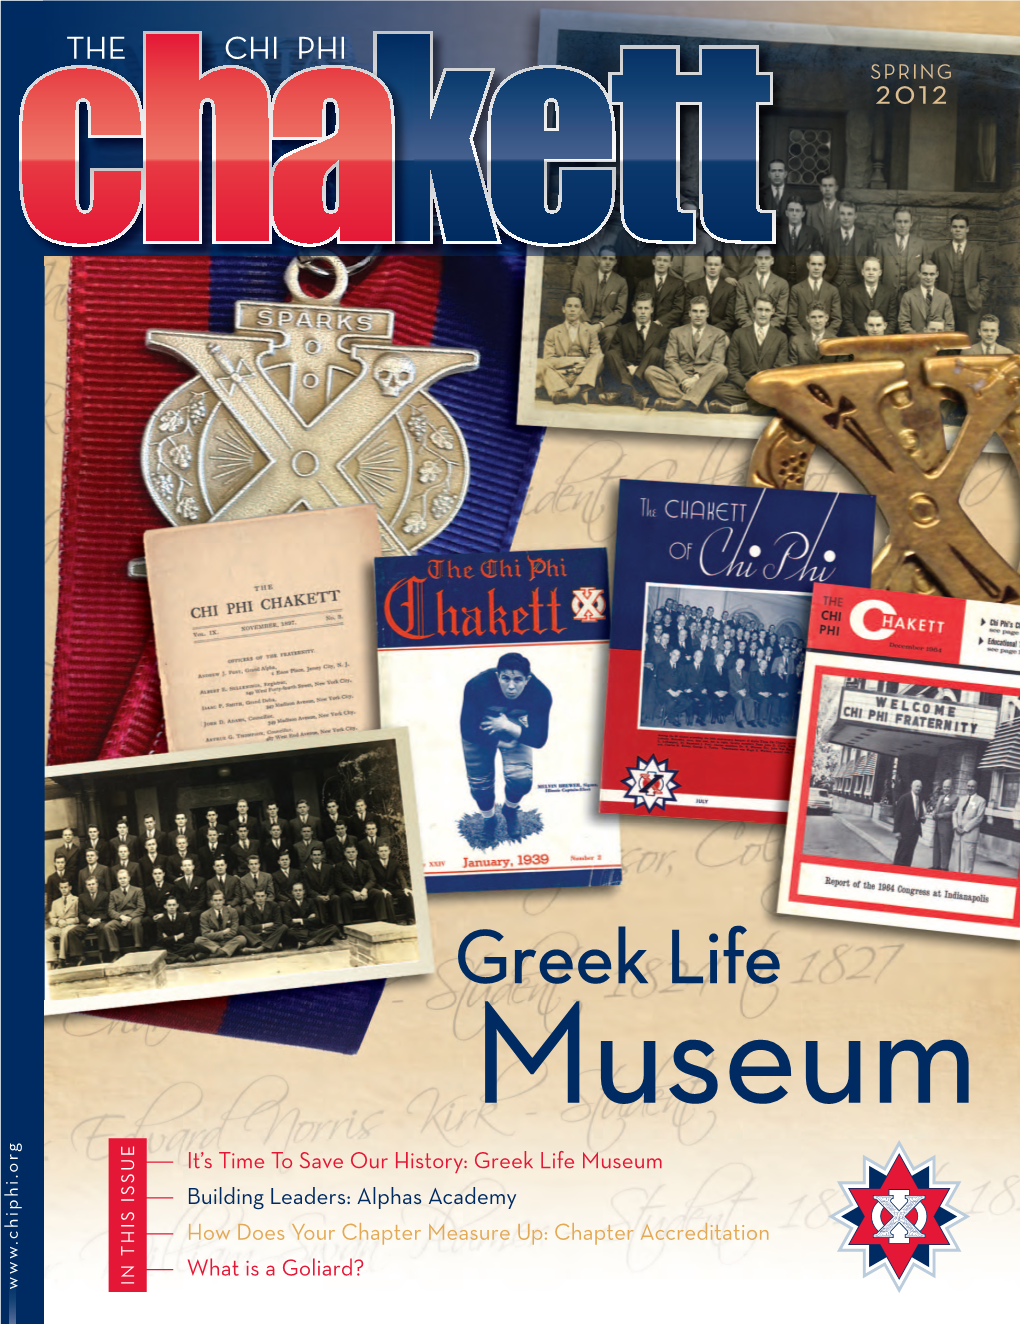 Greek Life Greeklife Museum Museum Ac Creditation SPRING 2012 Class of 2012 Is Largest Yet